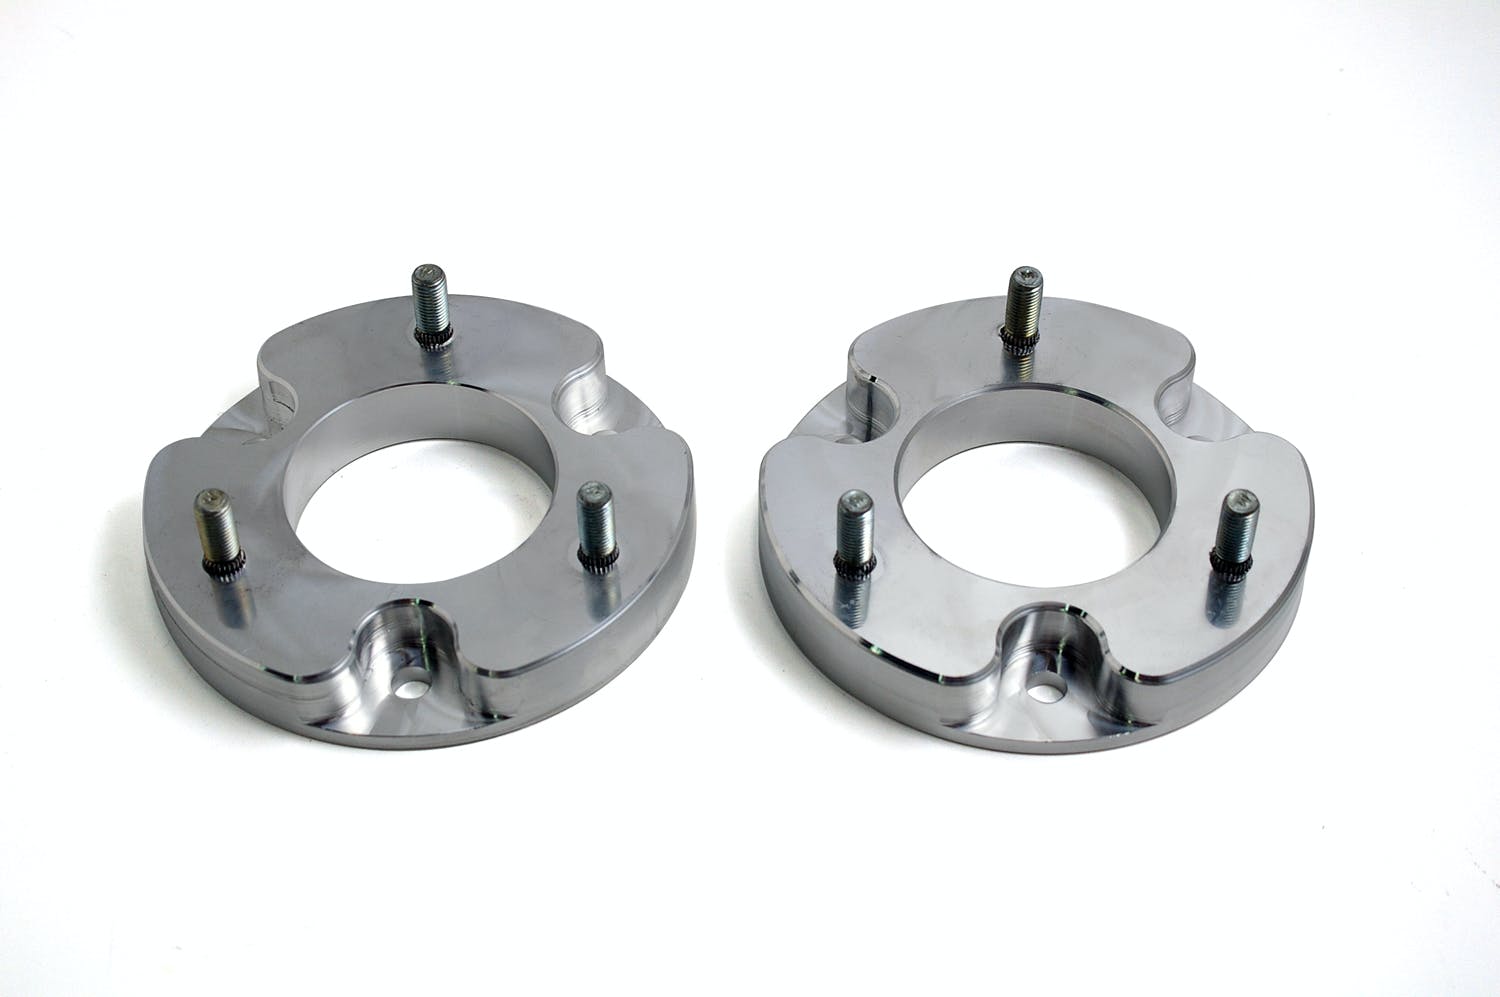 ReadyLIFT 66-4010 1.5" Front Suspension Leveling Kit